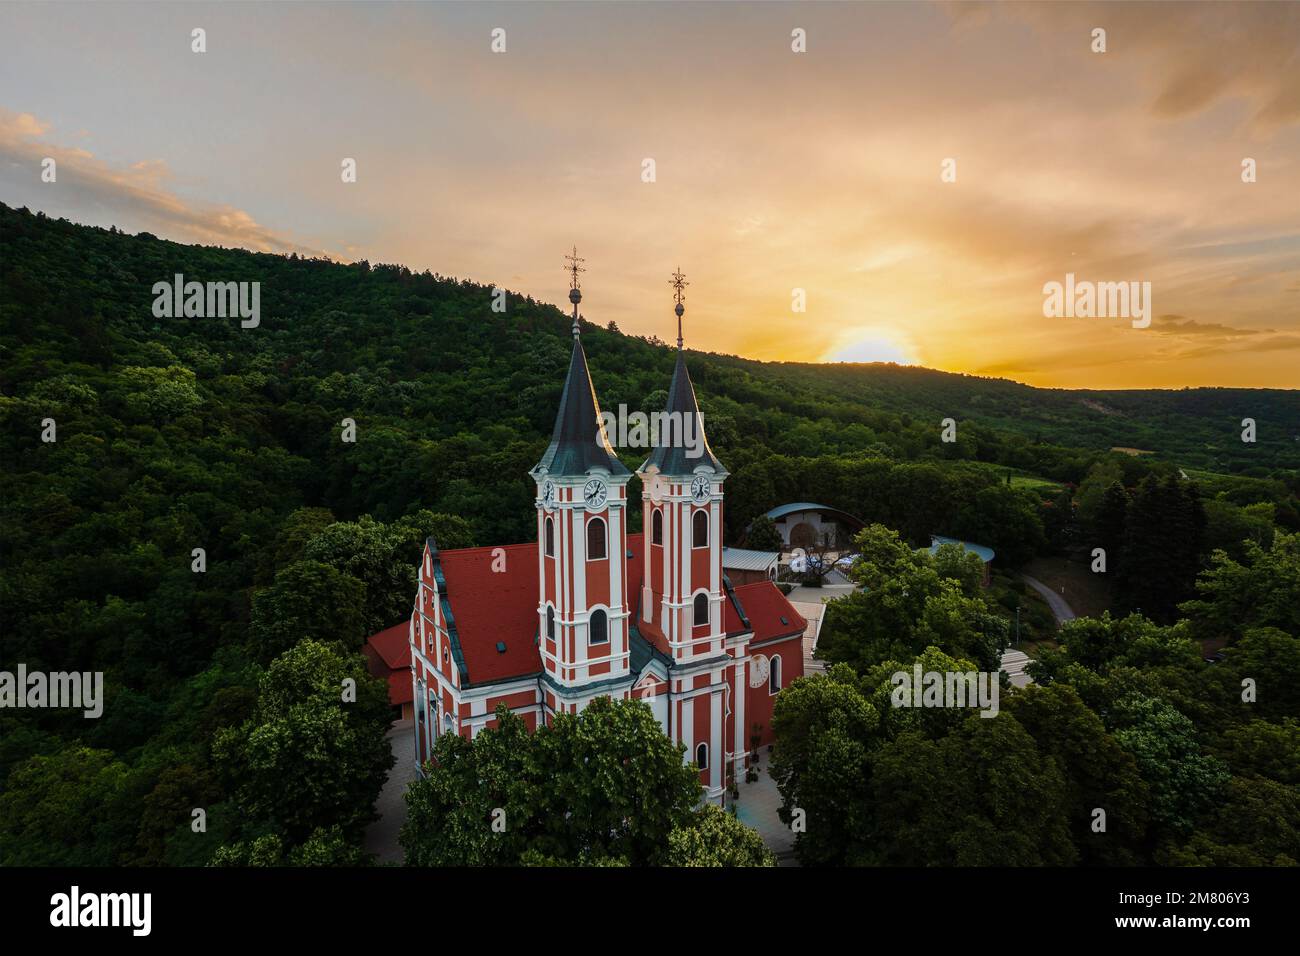 Soklos Mariagyud basilica is the bigest chatolic church in Villany wine region Hungary. This amayzing religious place is in the Mecsek mountains. Stock Photo